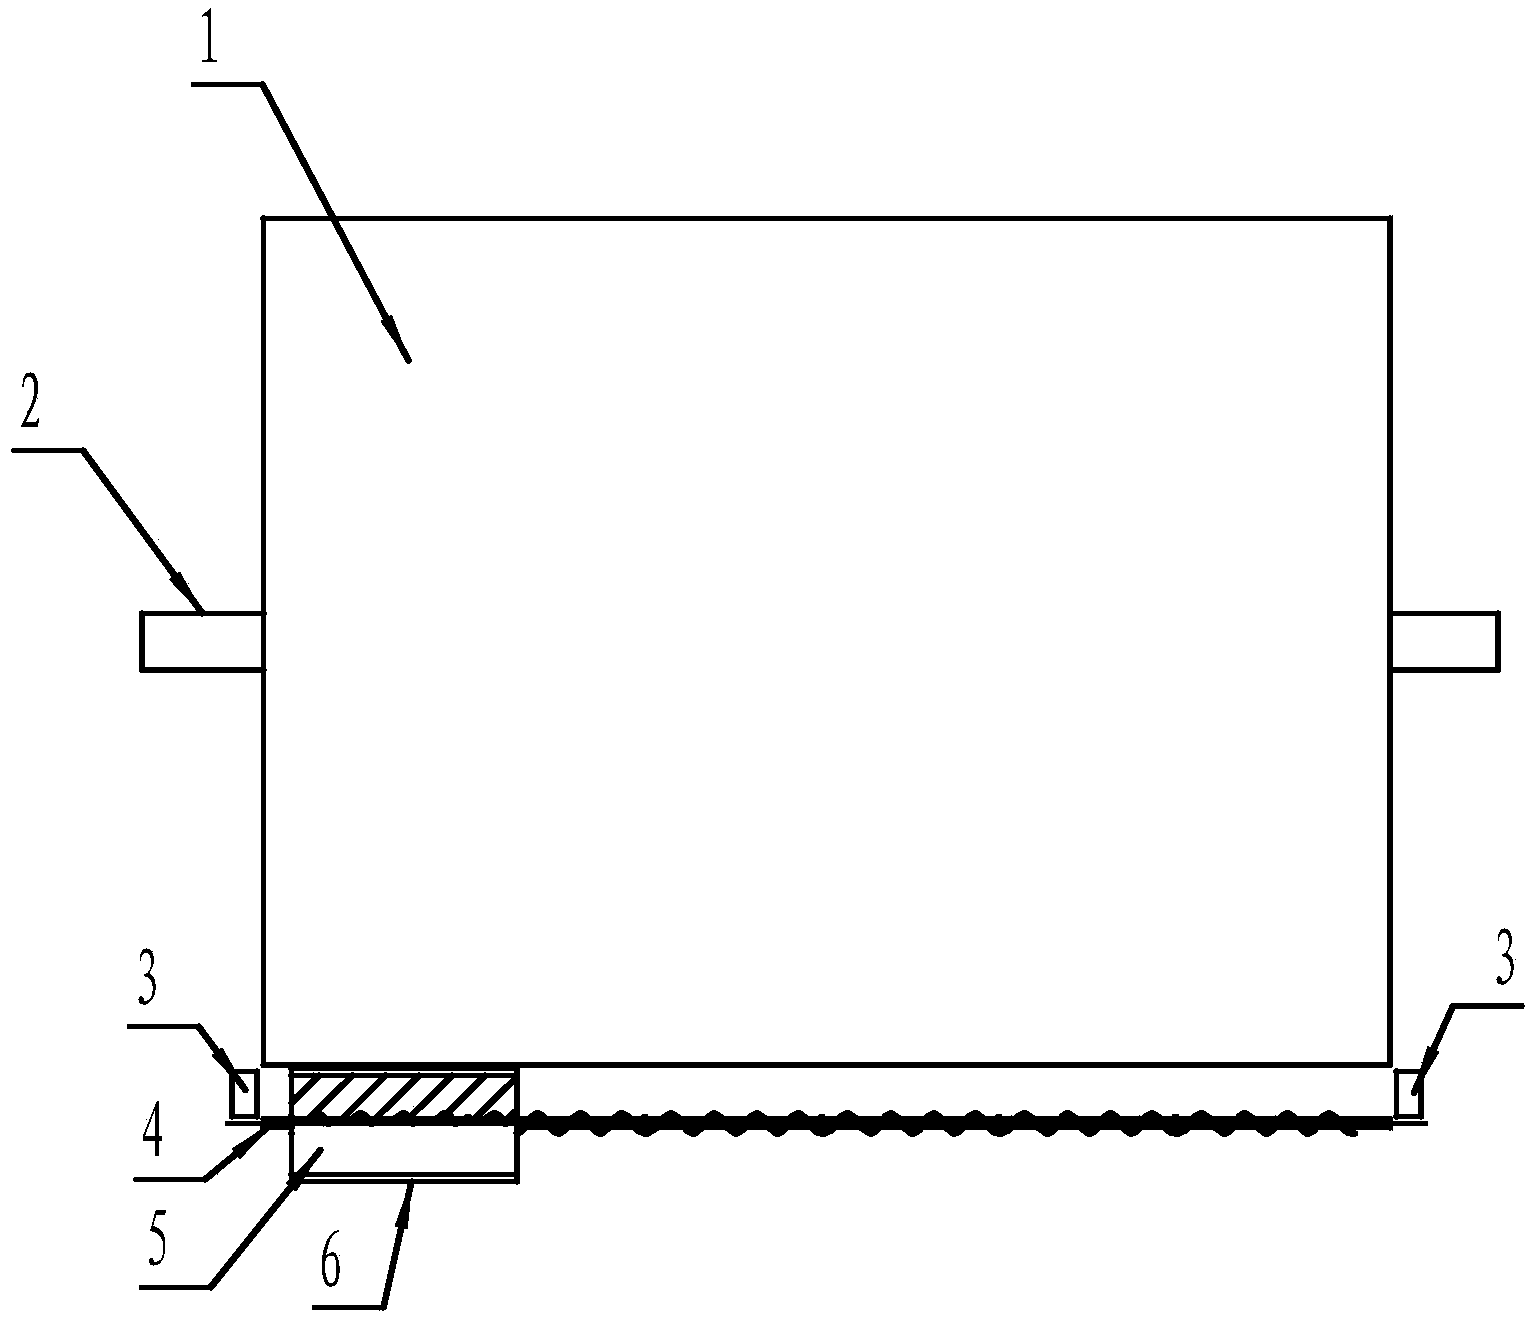 Separating screen with automatic cleaner